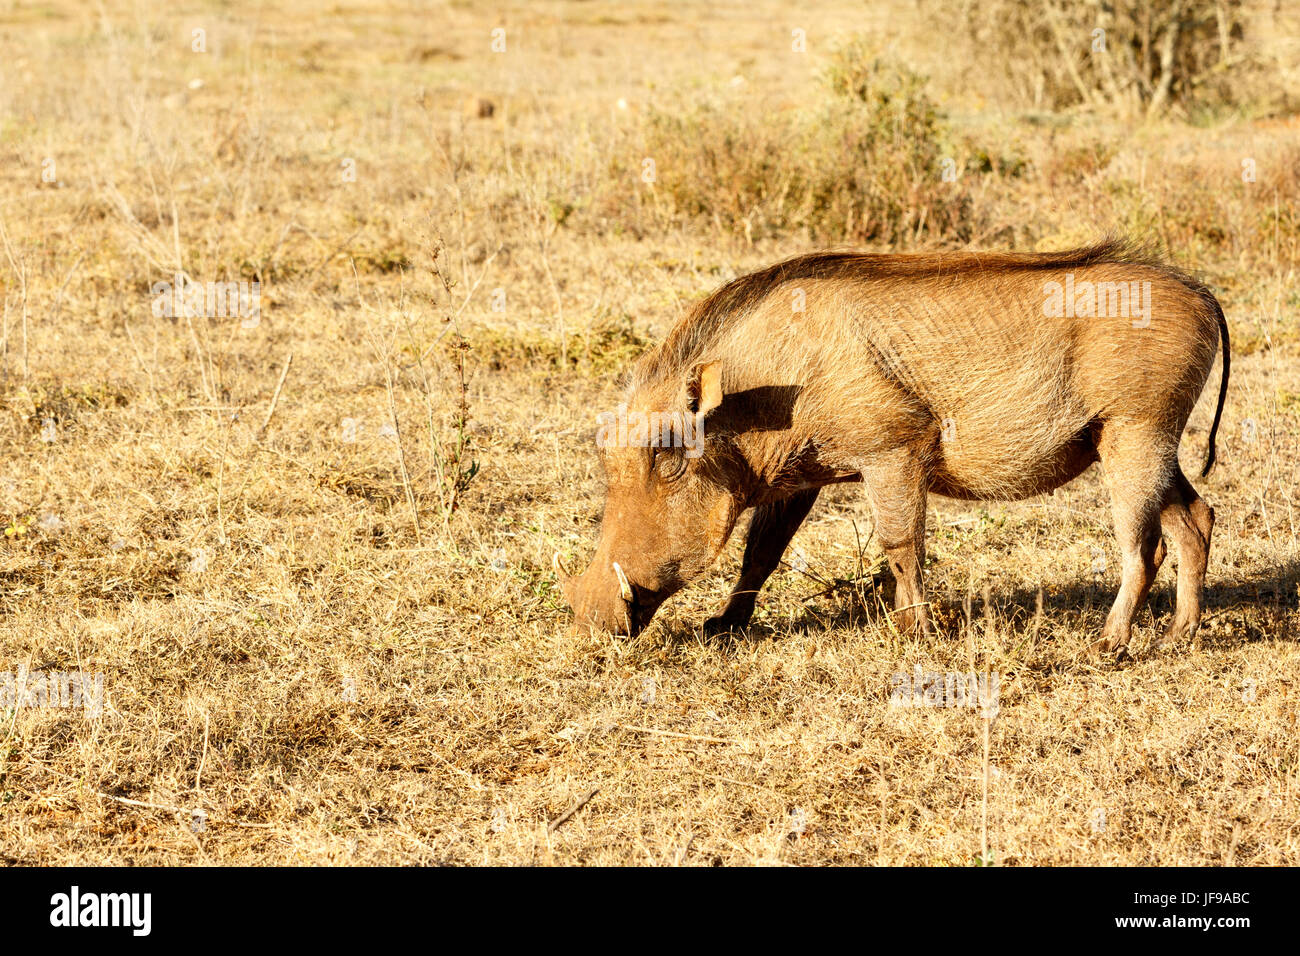 The common warthog sniffing the grass Stock Photo